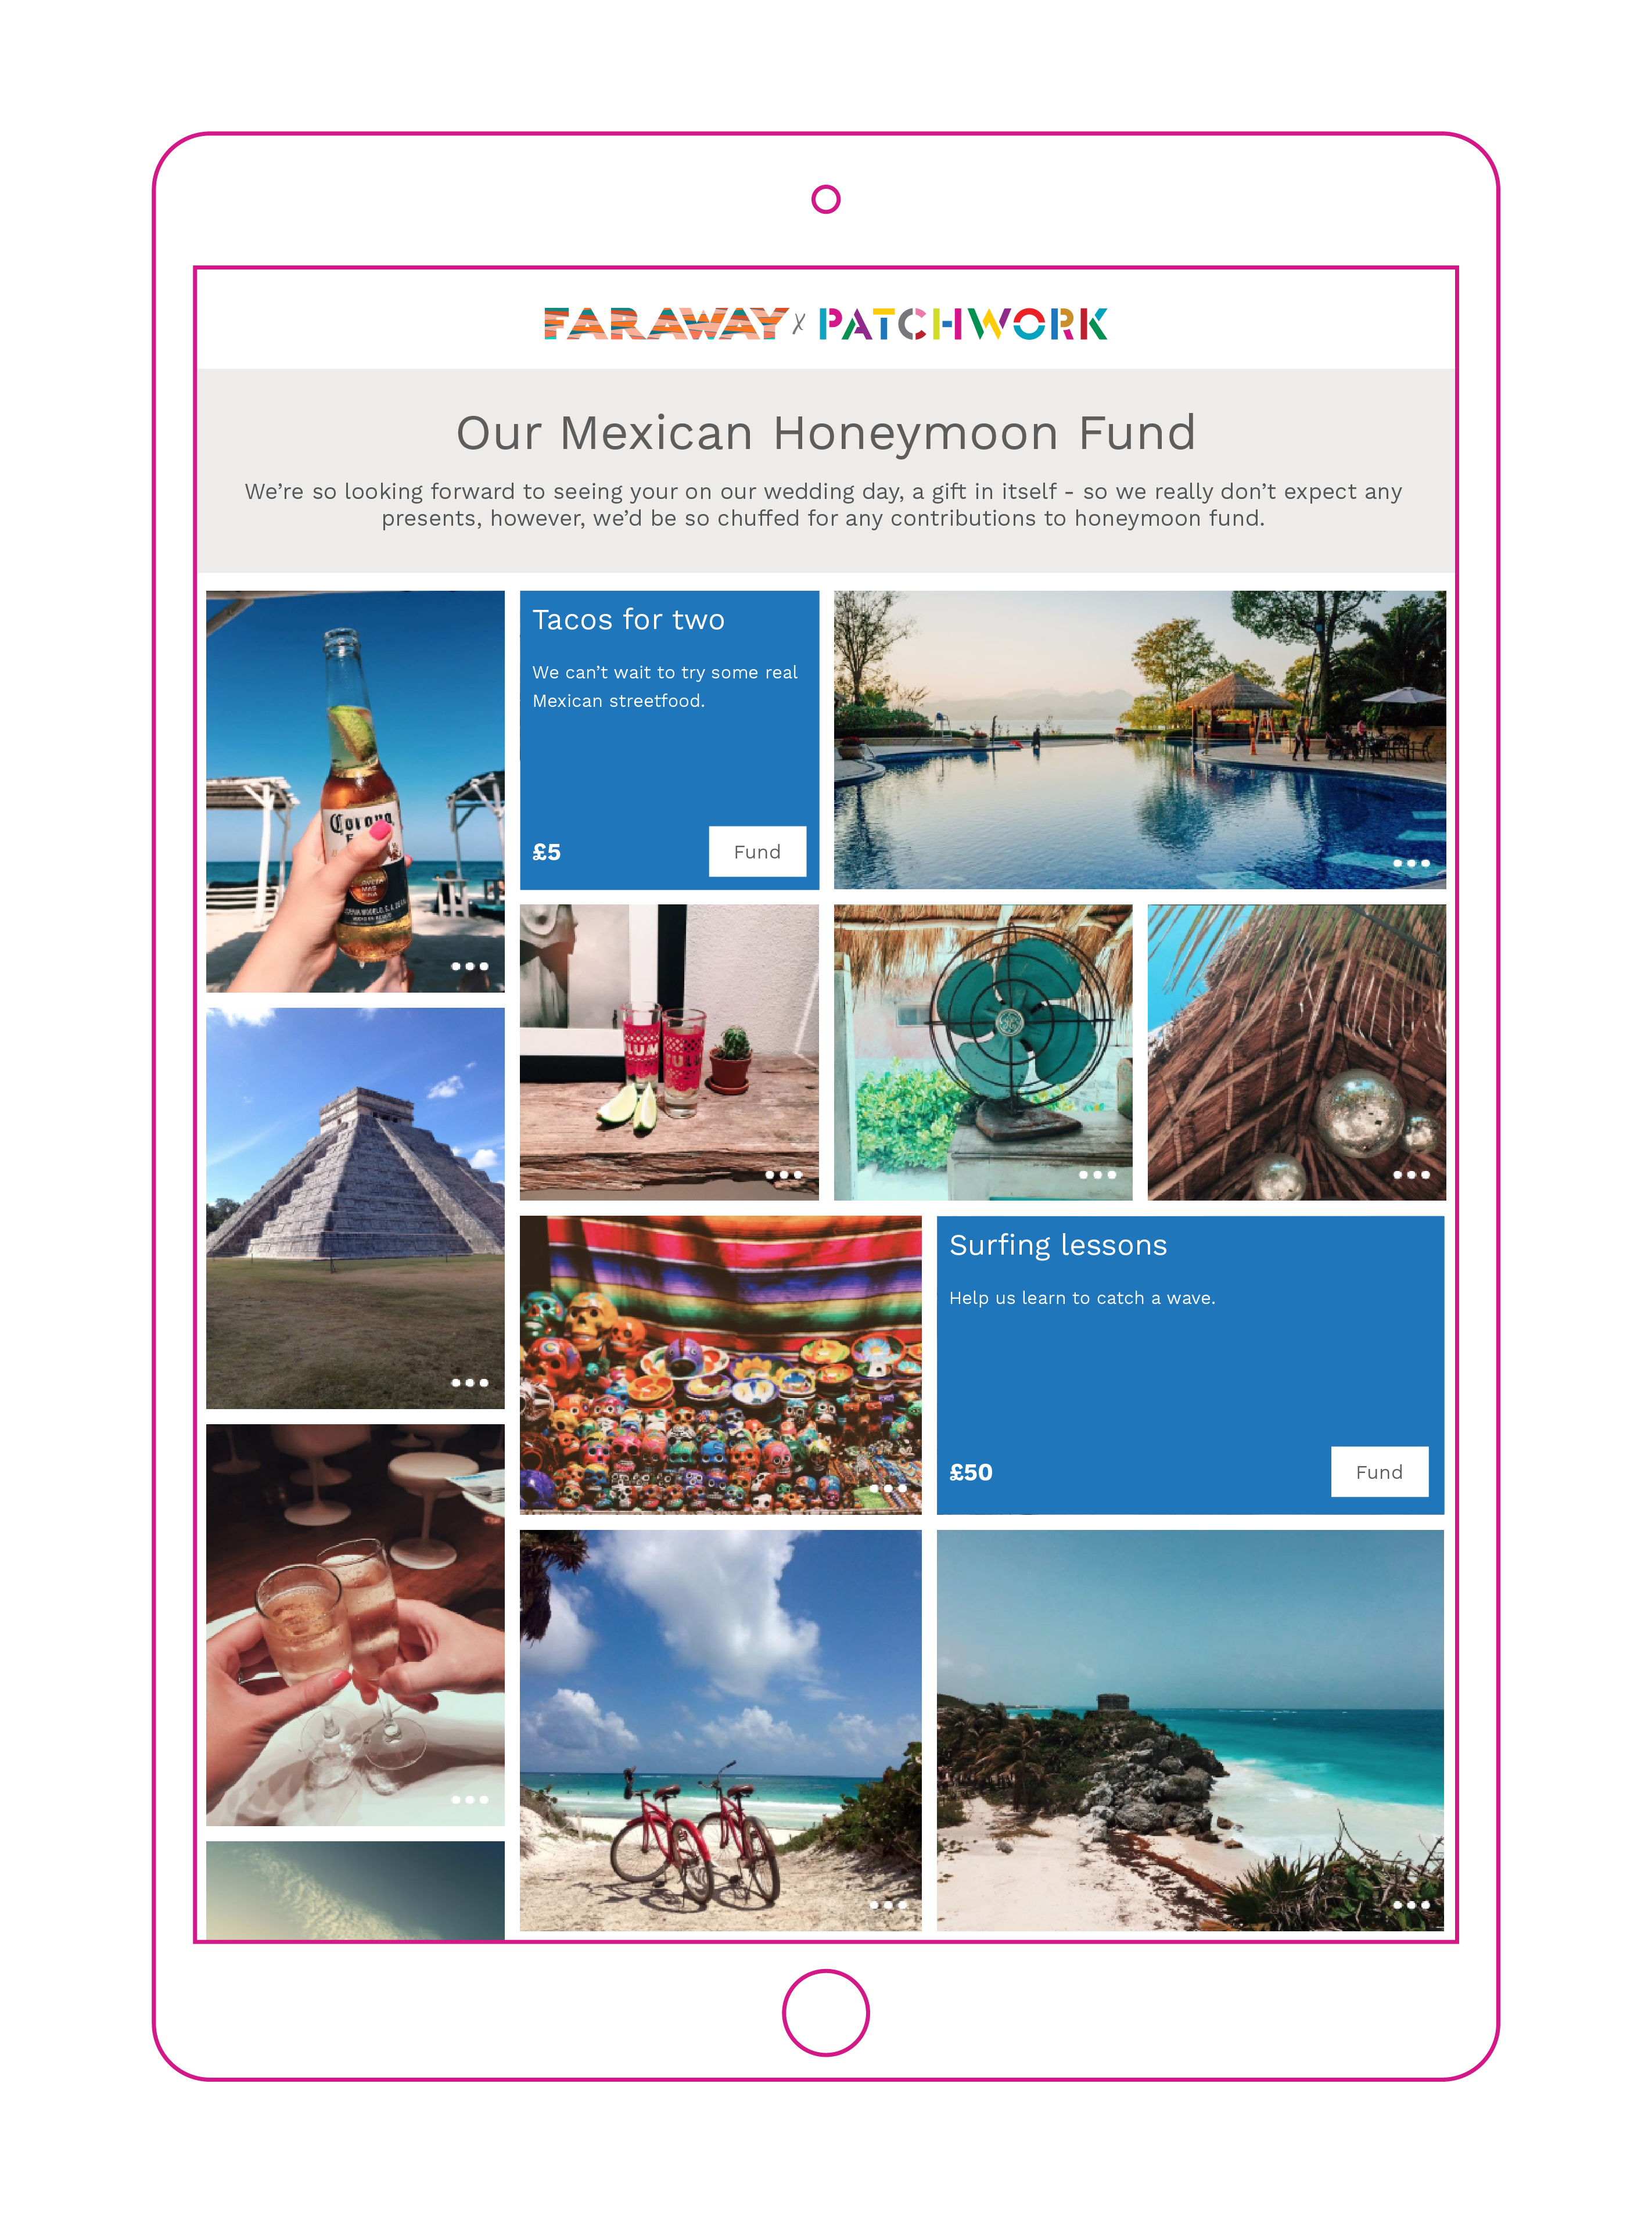 Create a bespoke honeymoon fund page for free as part of the Faraway honeymoon service